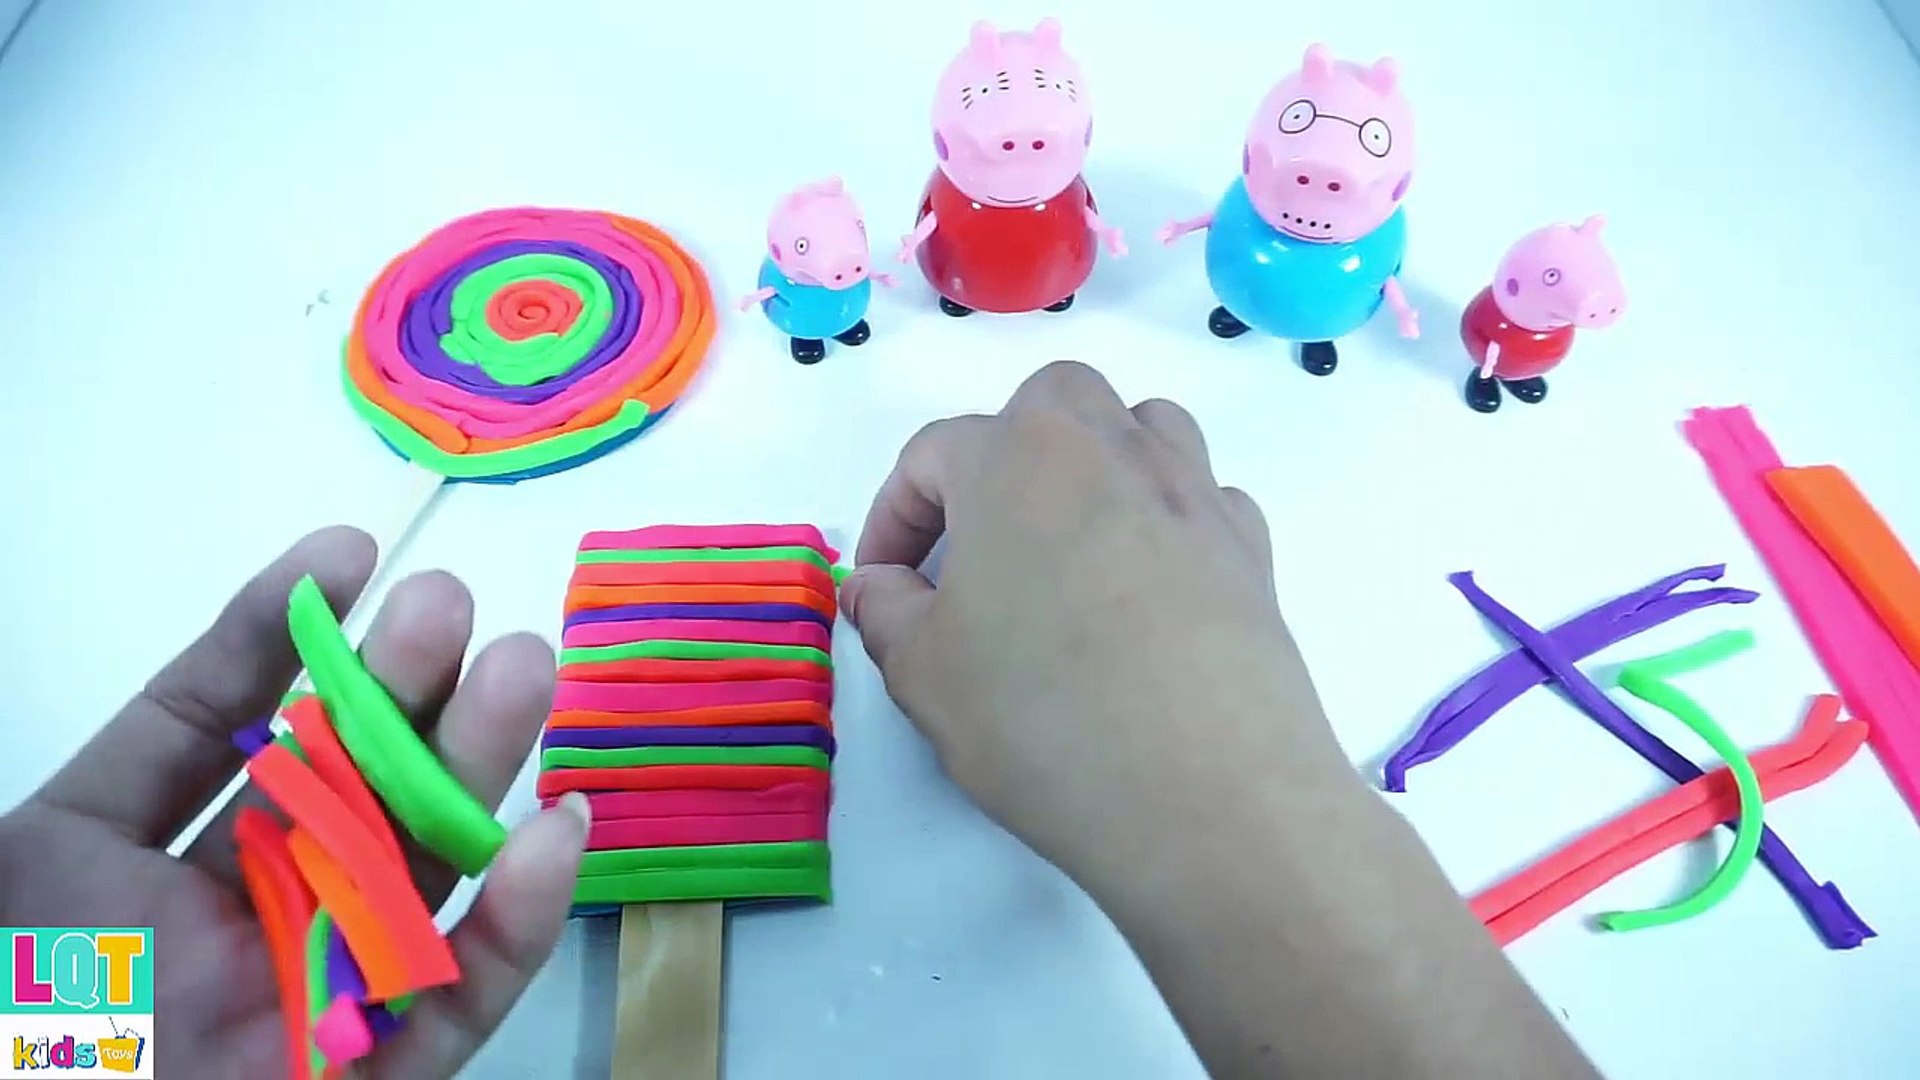 Fun Places For Kids - Make ice Cream with Peppa Pig - Kids activities